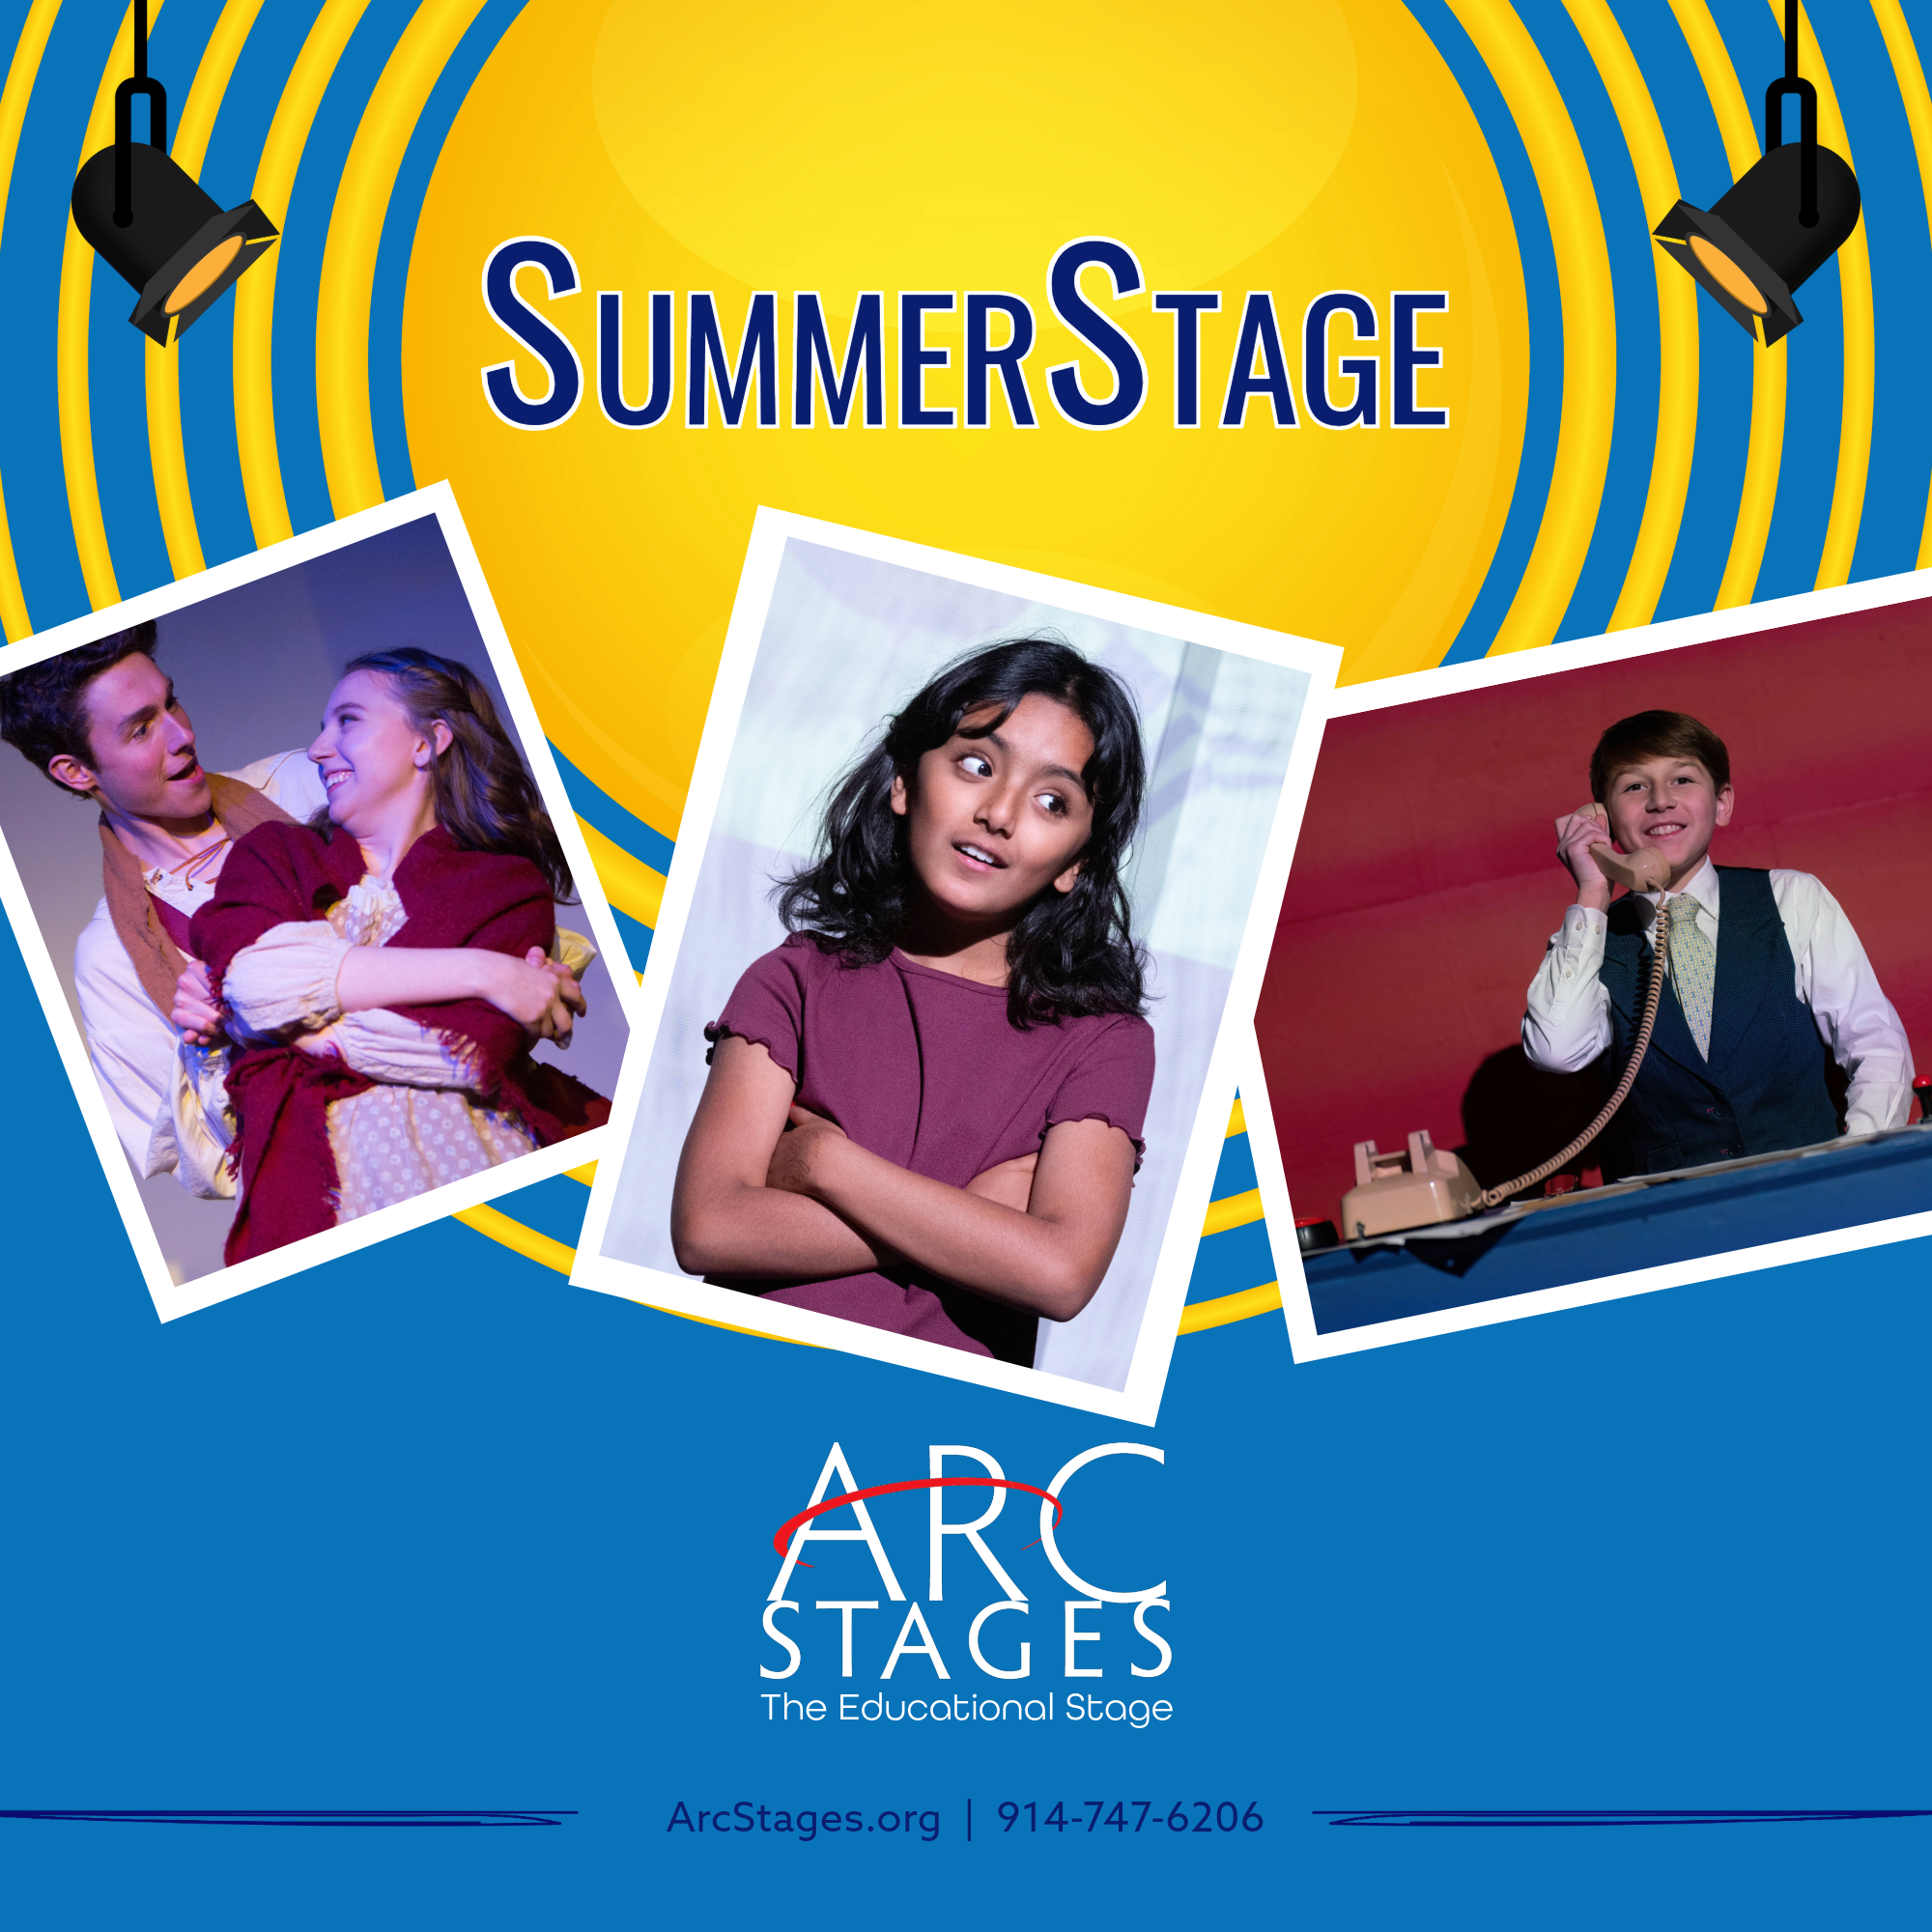 photos of children acting in summerstage at Arc Stages theater camp